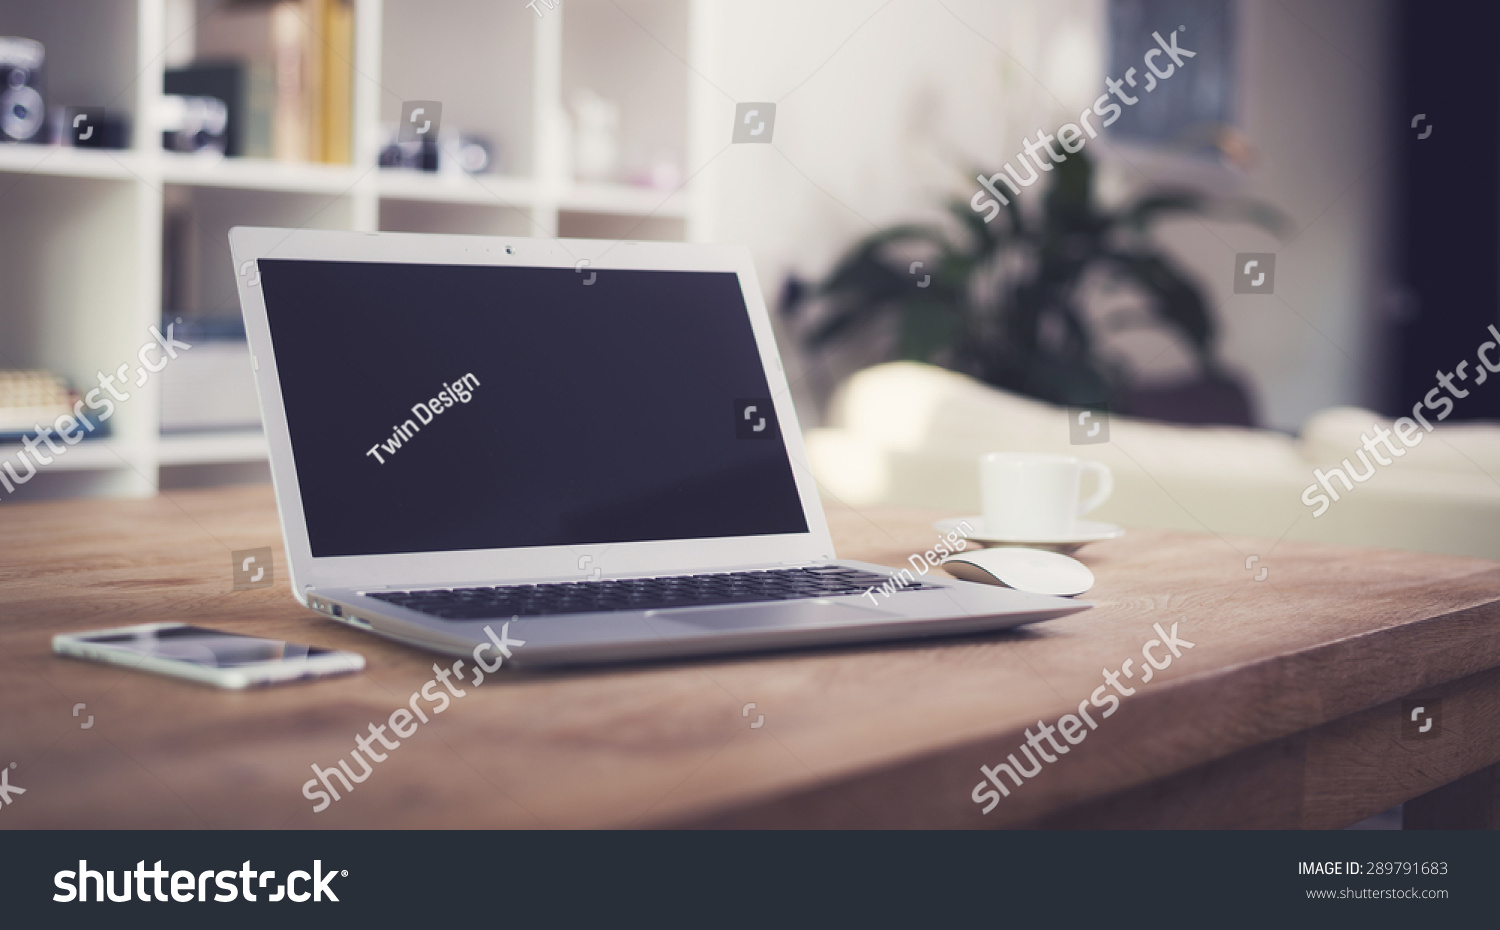 Laptop on table, home interior. #289791683